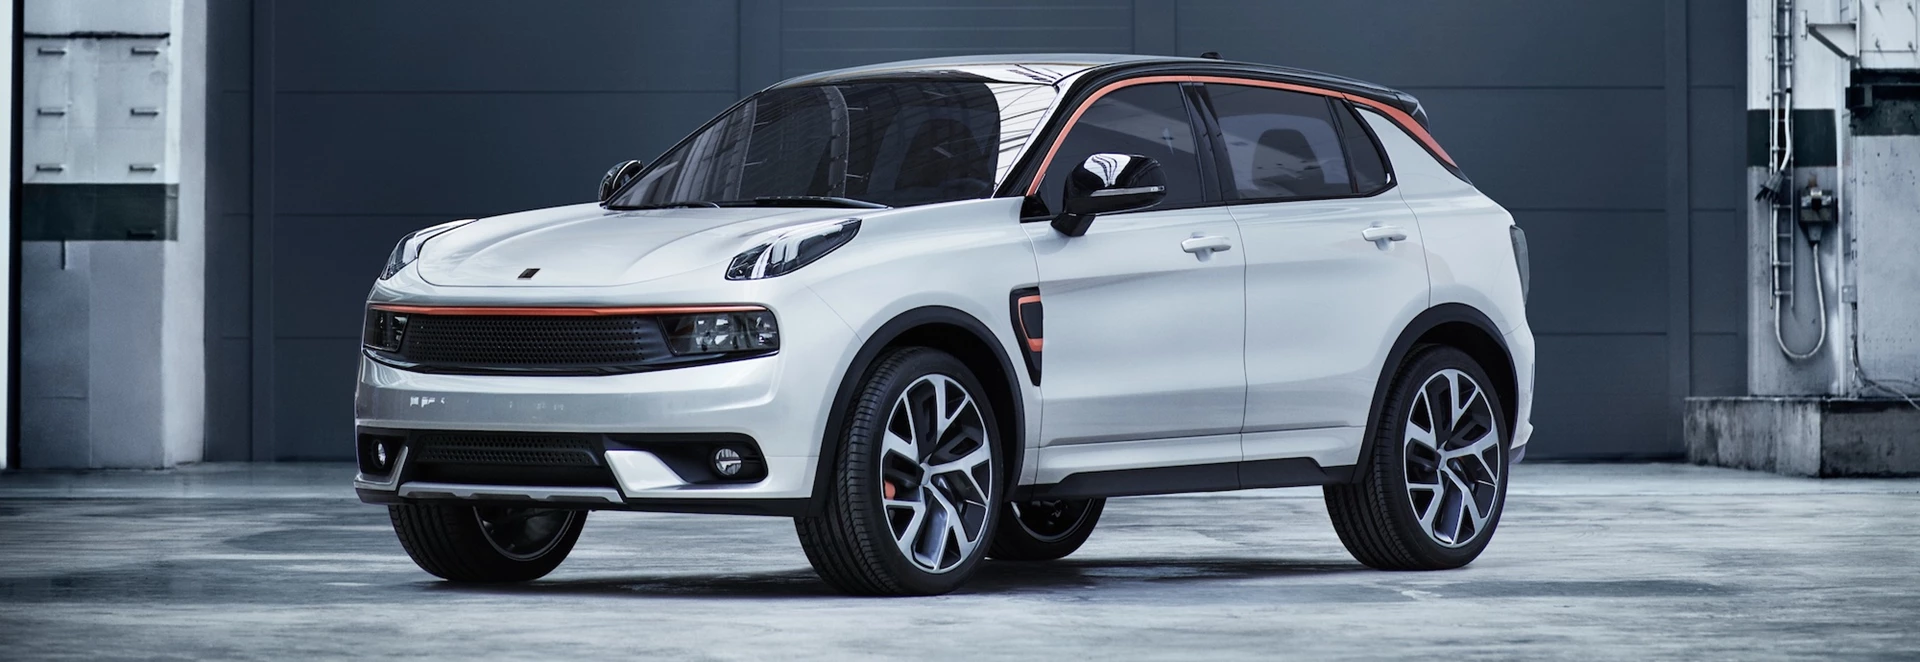 Lynk & Co to build vehicles at Volvo’s Belgium plant